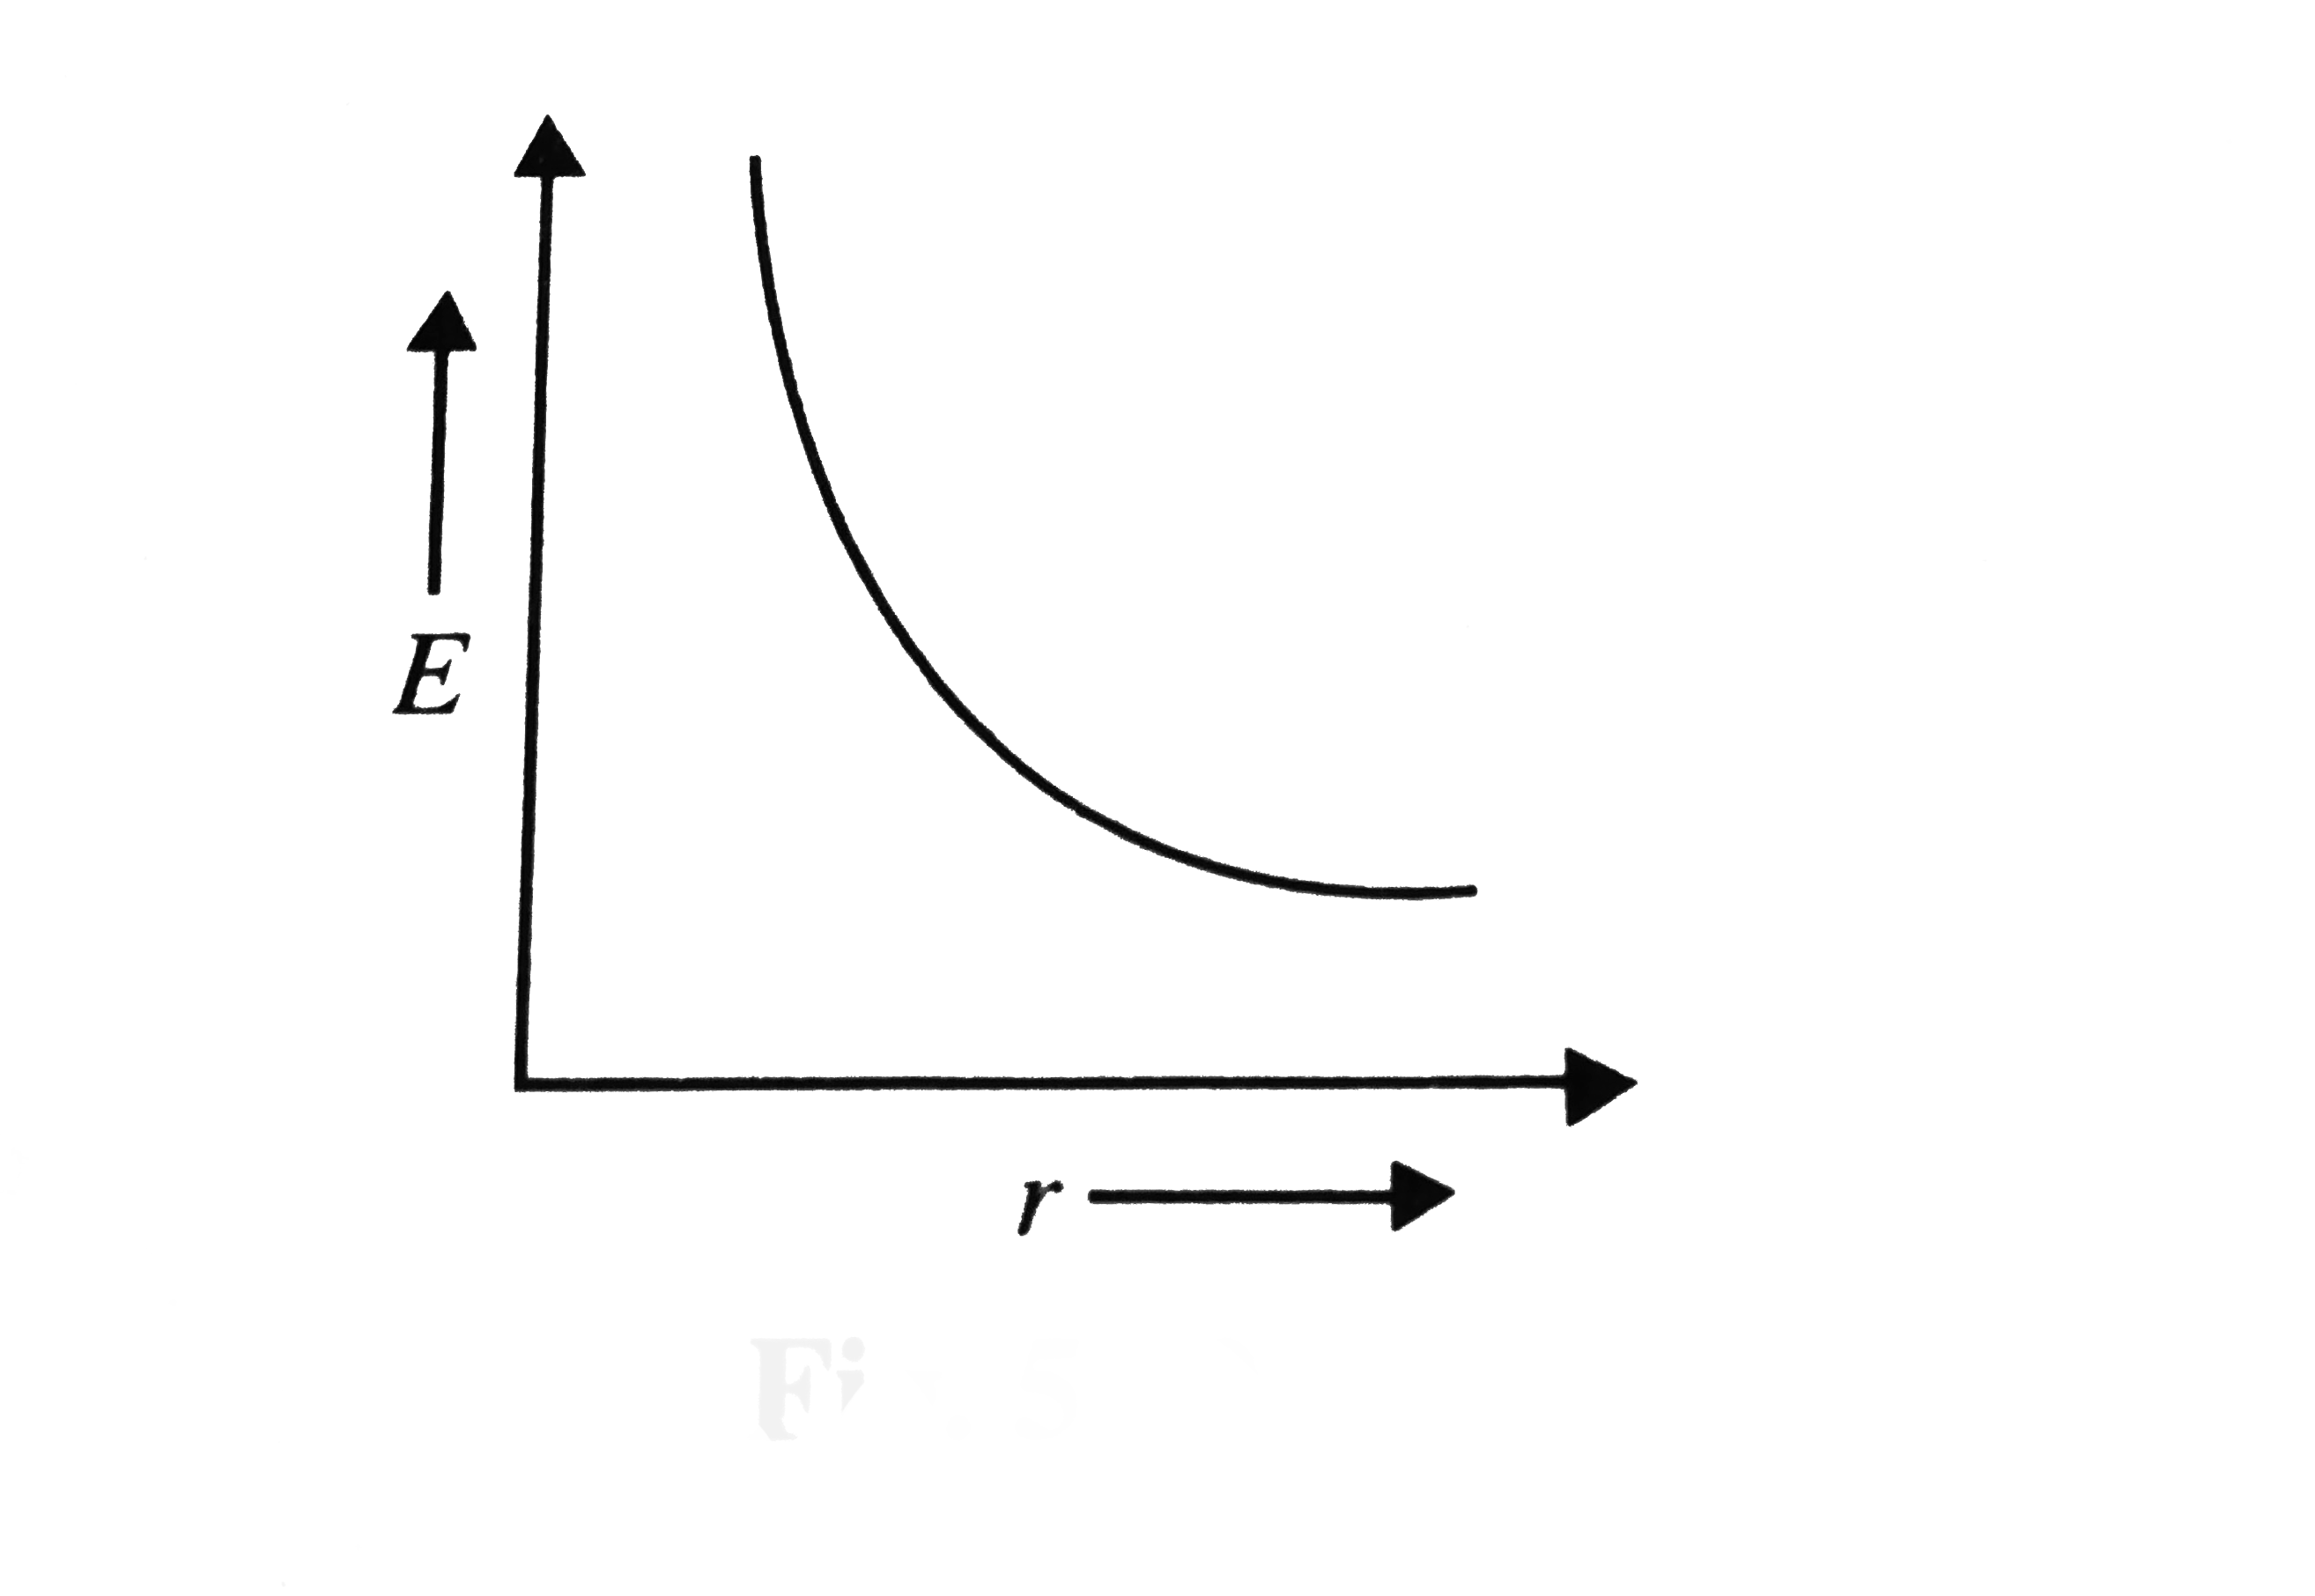 Energy density E (energy per unit volume ) of the medium ar a distance r from a sound source varies acording to the curve shown in figure. Which of the following are possible?